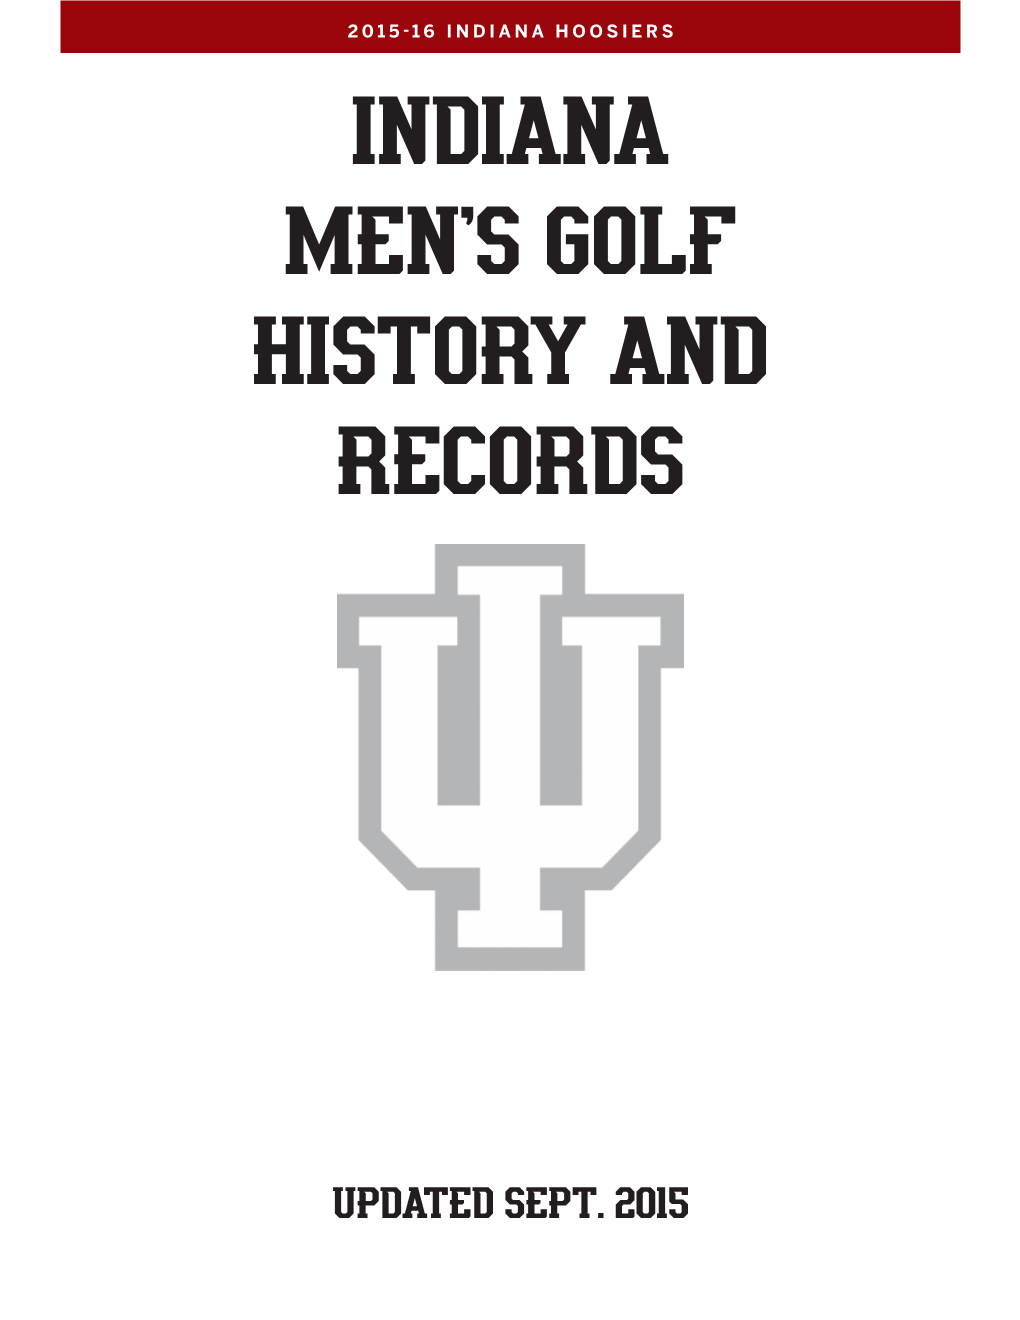 Indiana Men's Golf History and Records